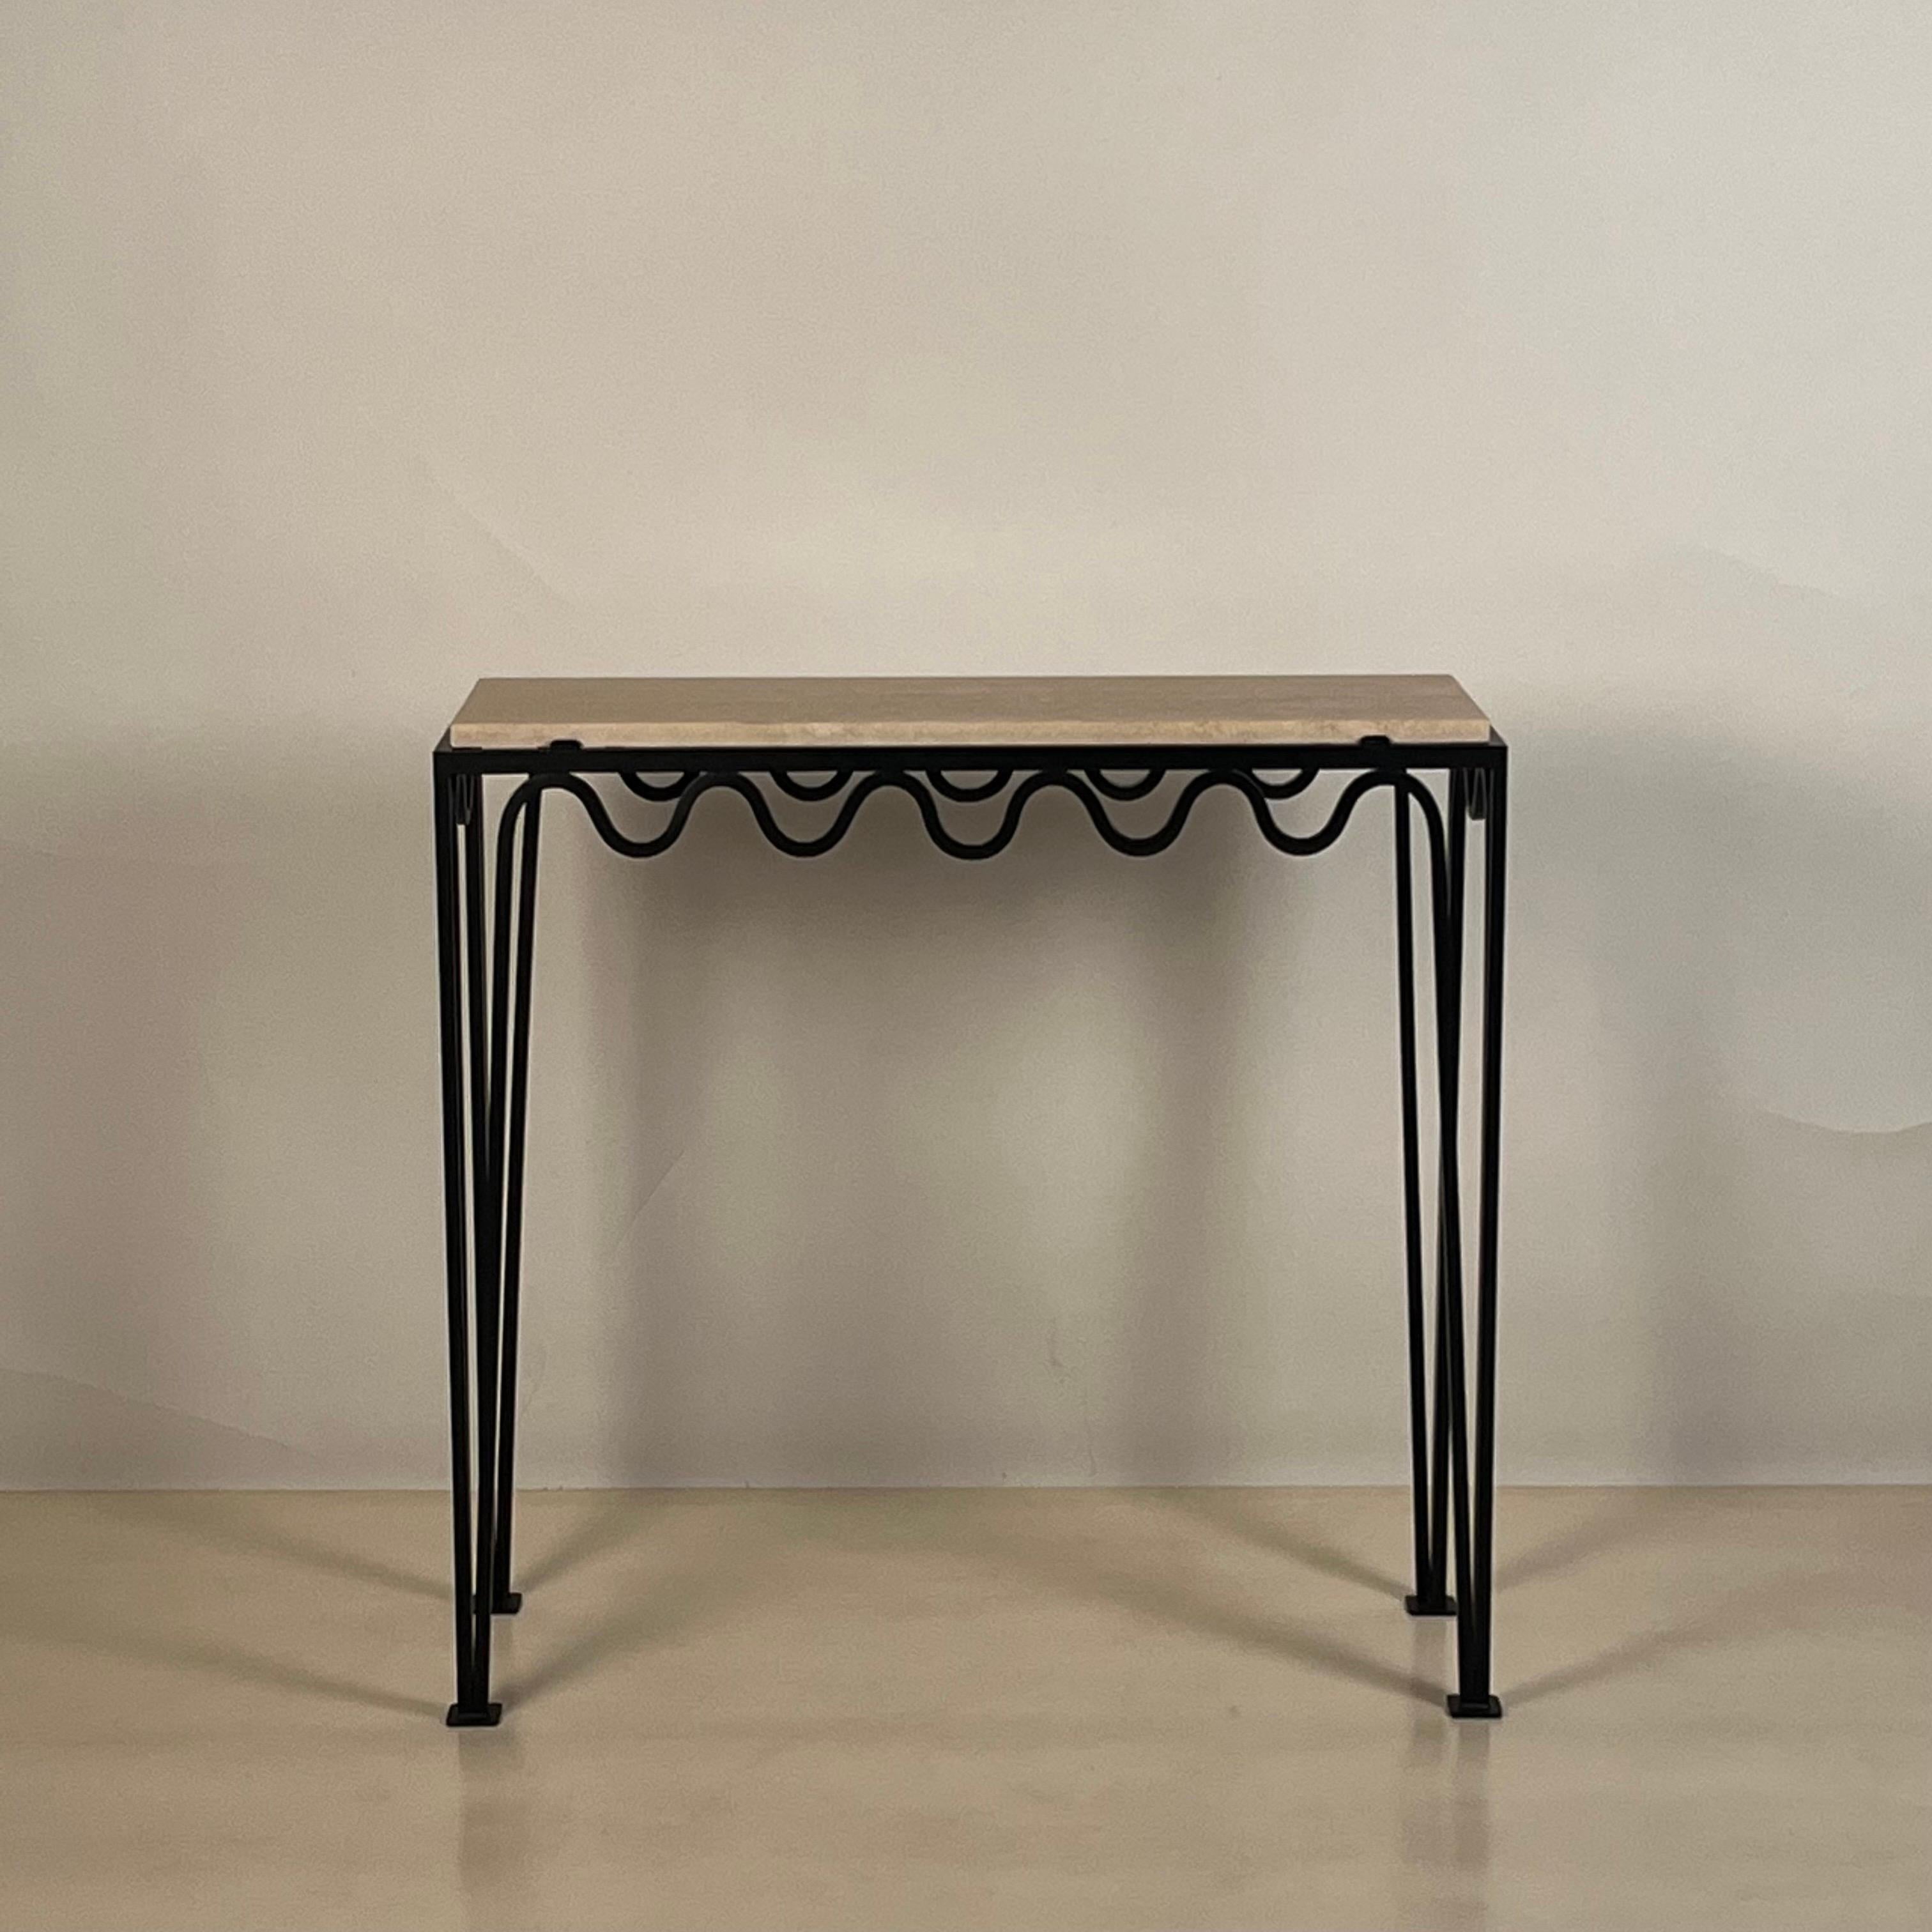 'Méandre' travertine console by Design Frères.

Chic and understated.